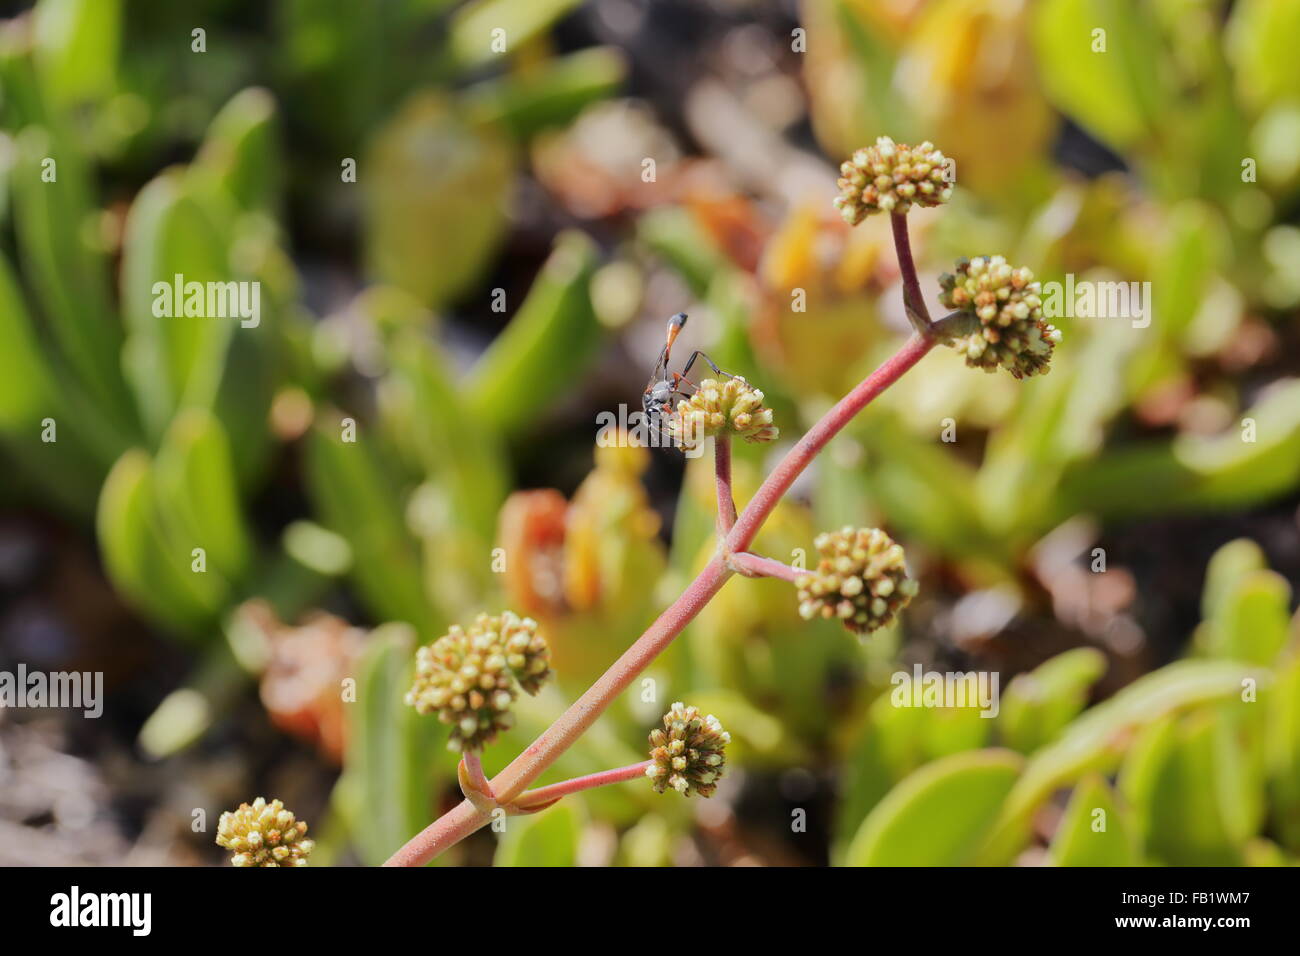 Wasp on the inflorescence of crassula species Stock Photo